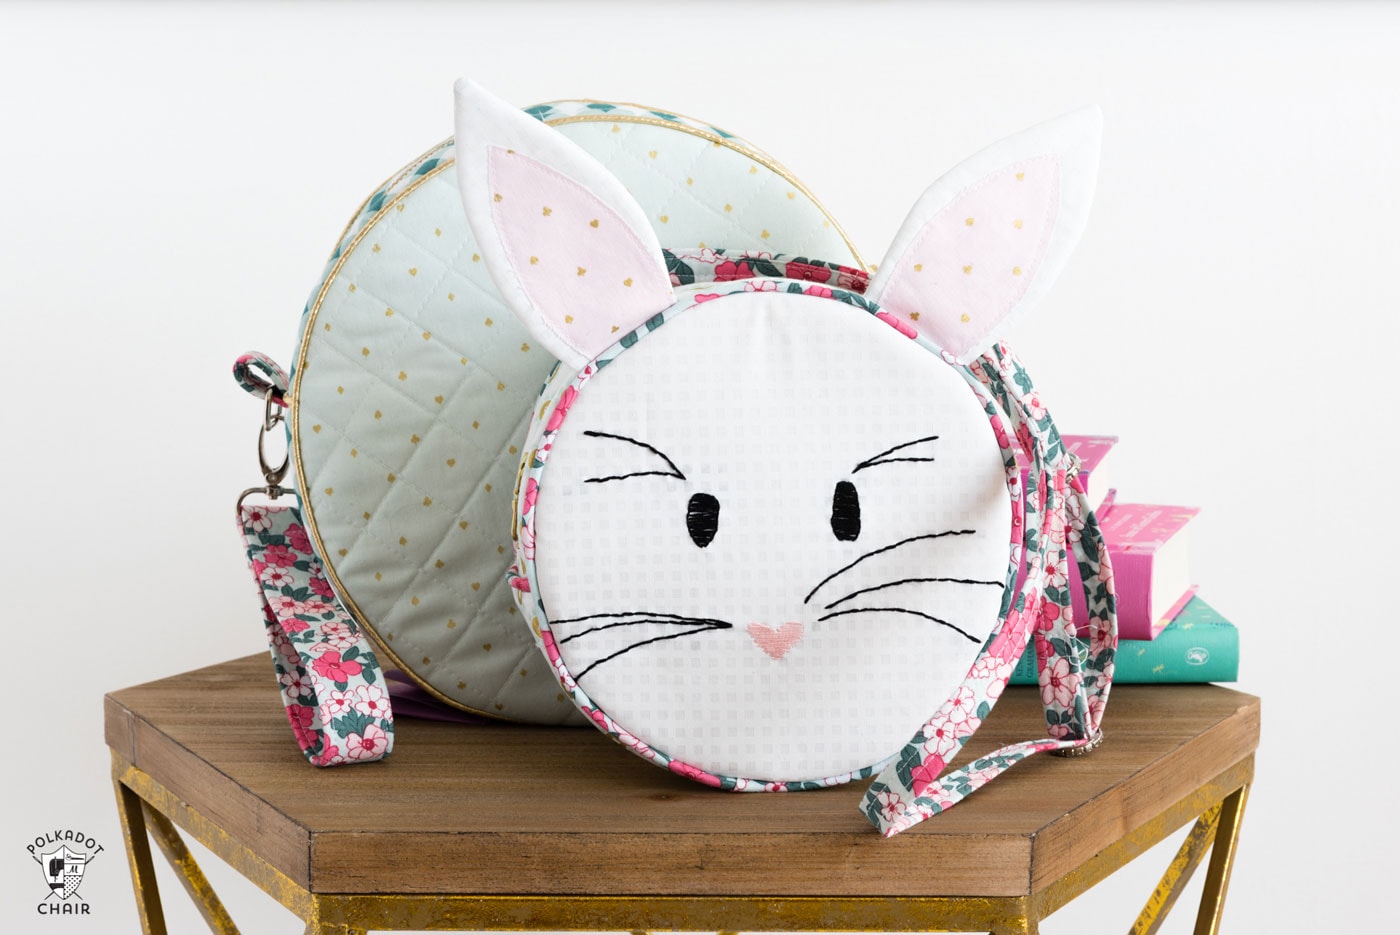 Introducing the Alice Bag Sewing Pattern. A whimsical and versatile purse sewing pattern featuring bunny ears! It can be made in two sizes and features 4 different handle style options including cross body straps! 